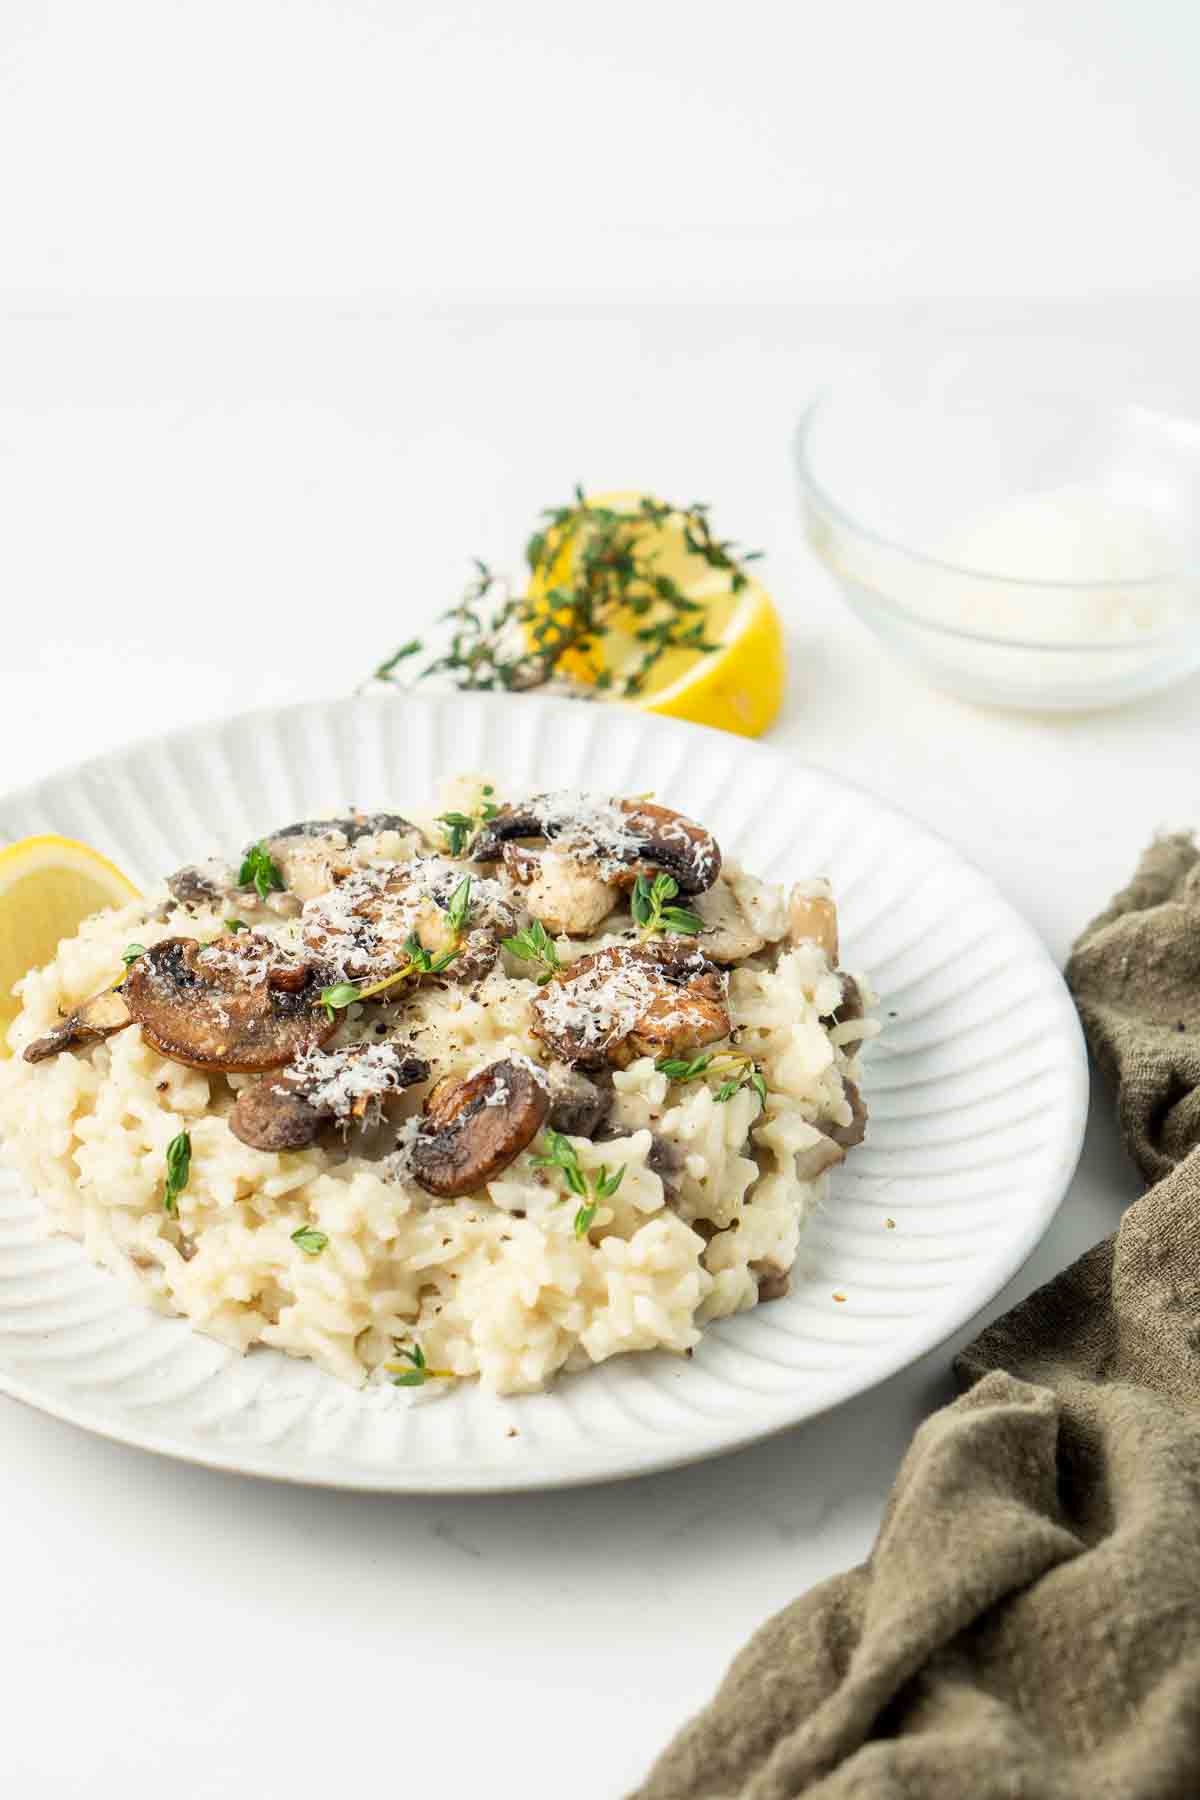 Mushroom risotto served on a white plate.